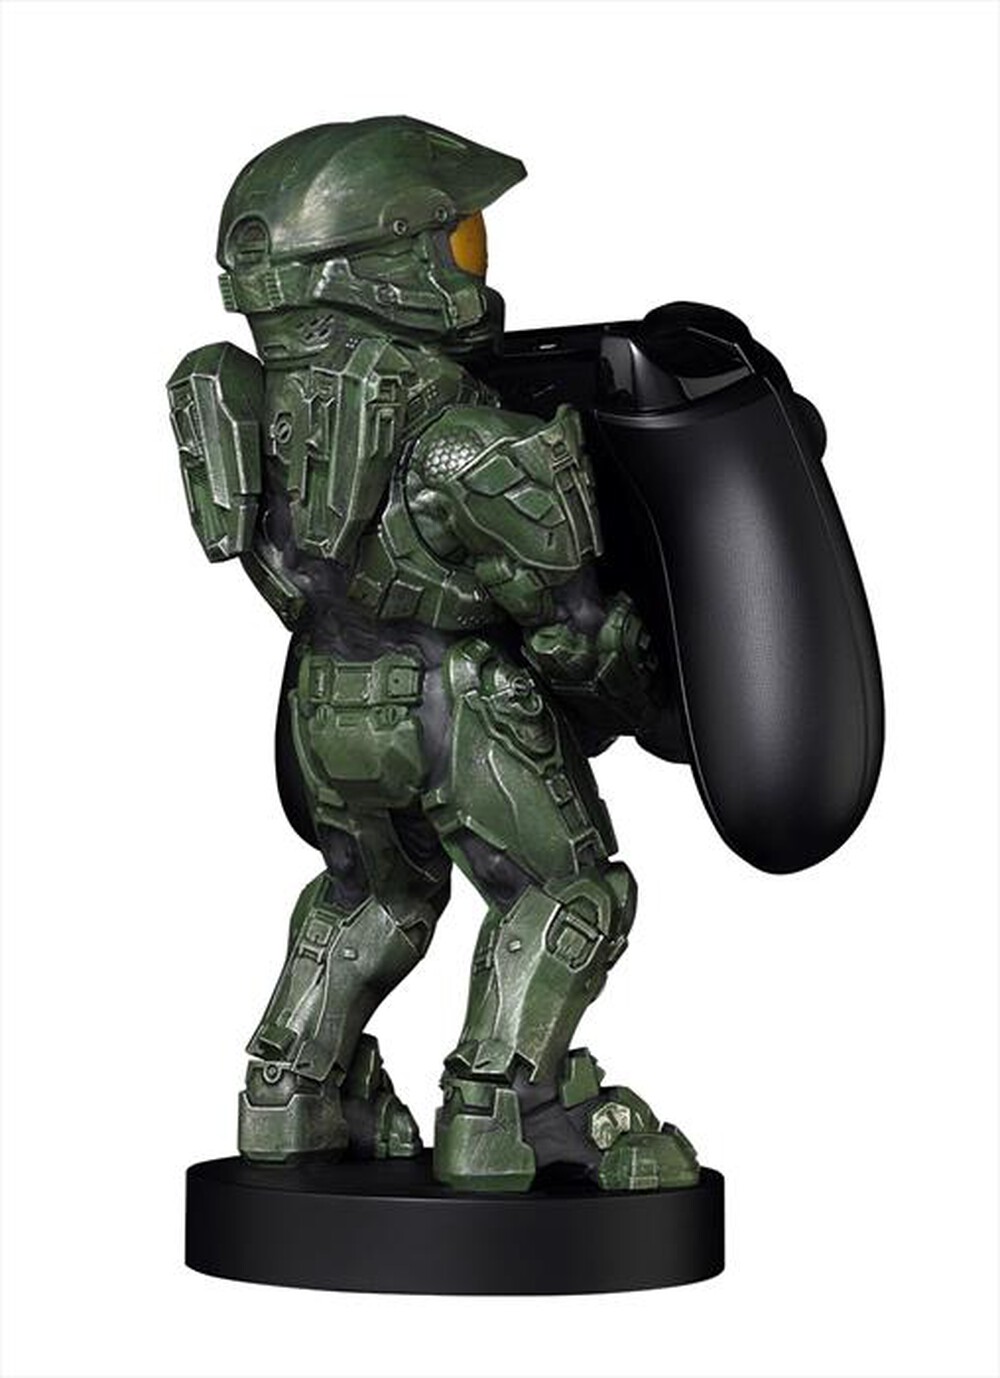 "EXQUISITE GAMING - MASTER CHIEF CABLE GUY"